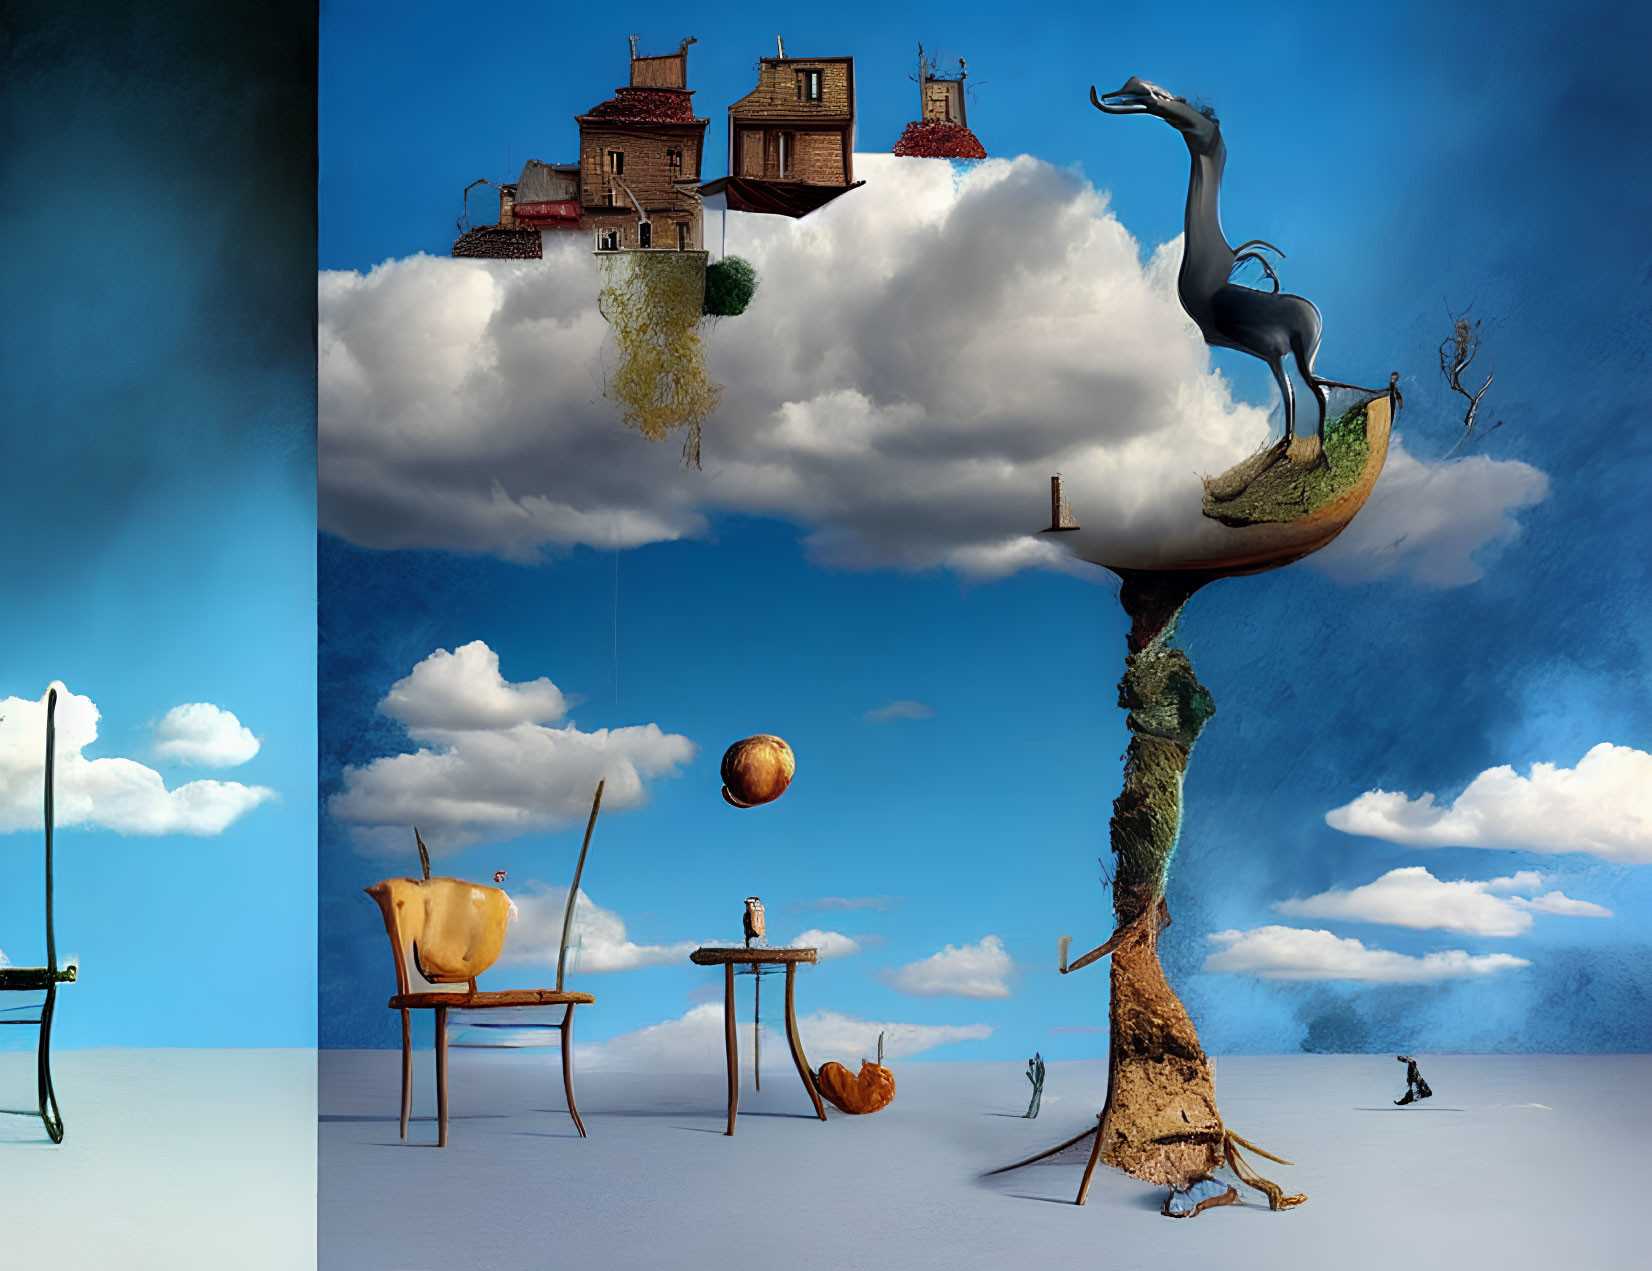 Surreal floating island artwork with whimsical elements